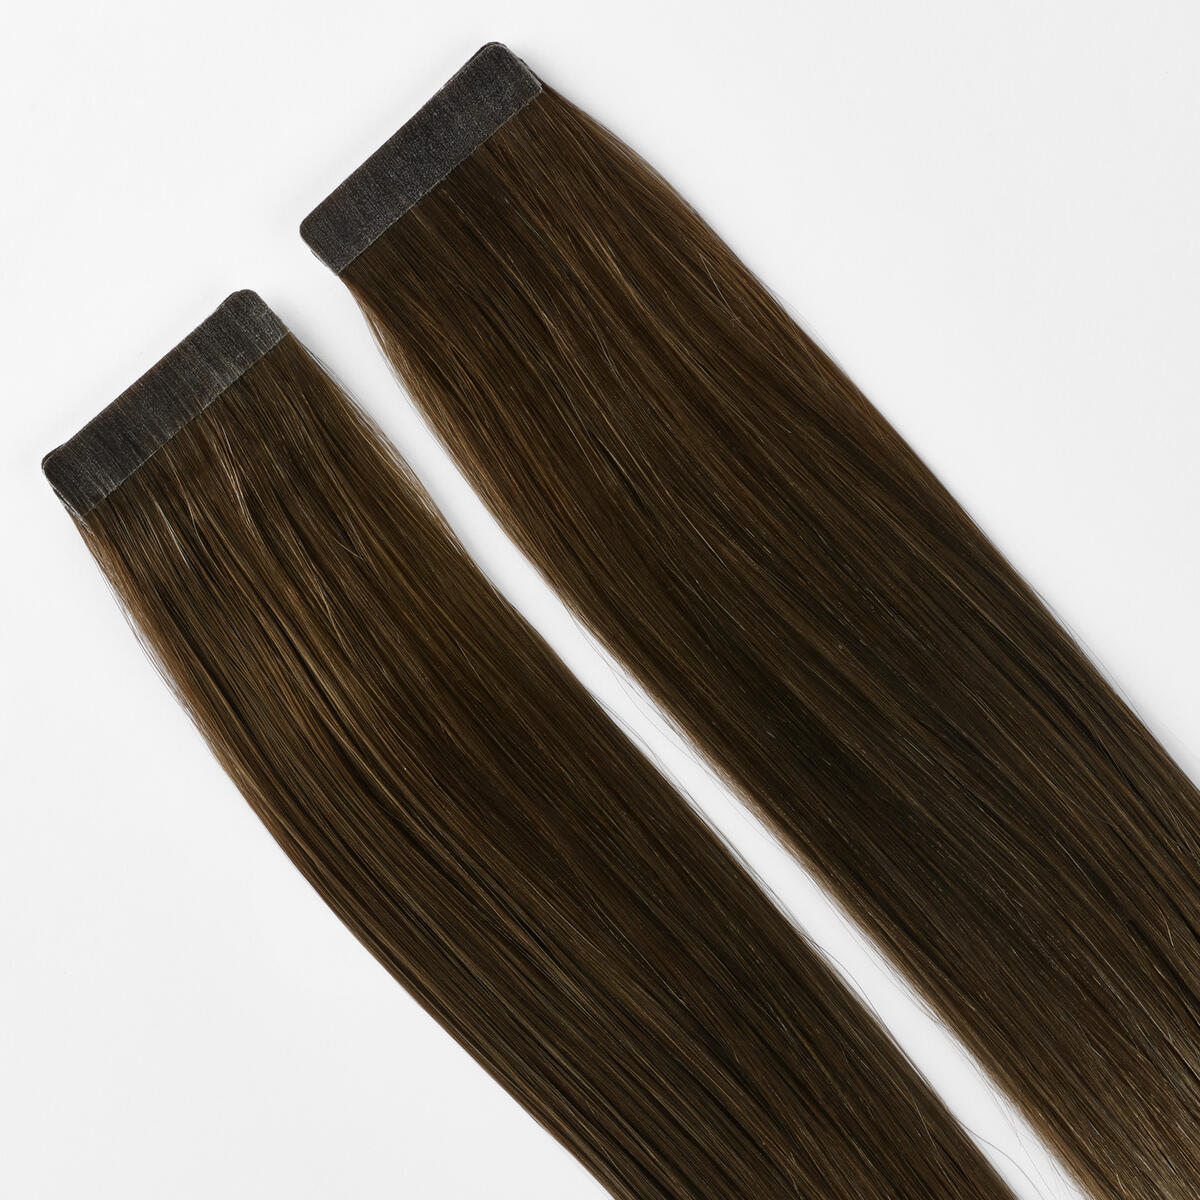 Basic Tape Extensions Classic 4 O2.6/8.0 Dark Ash Blond Ombre 40 cm